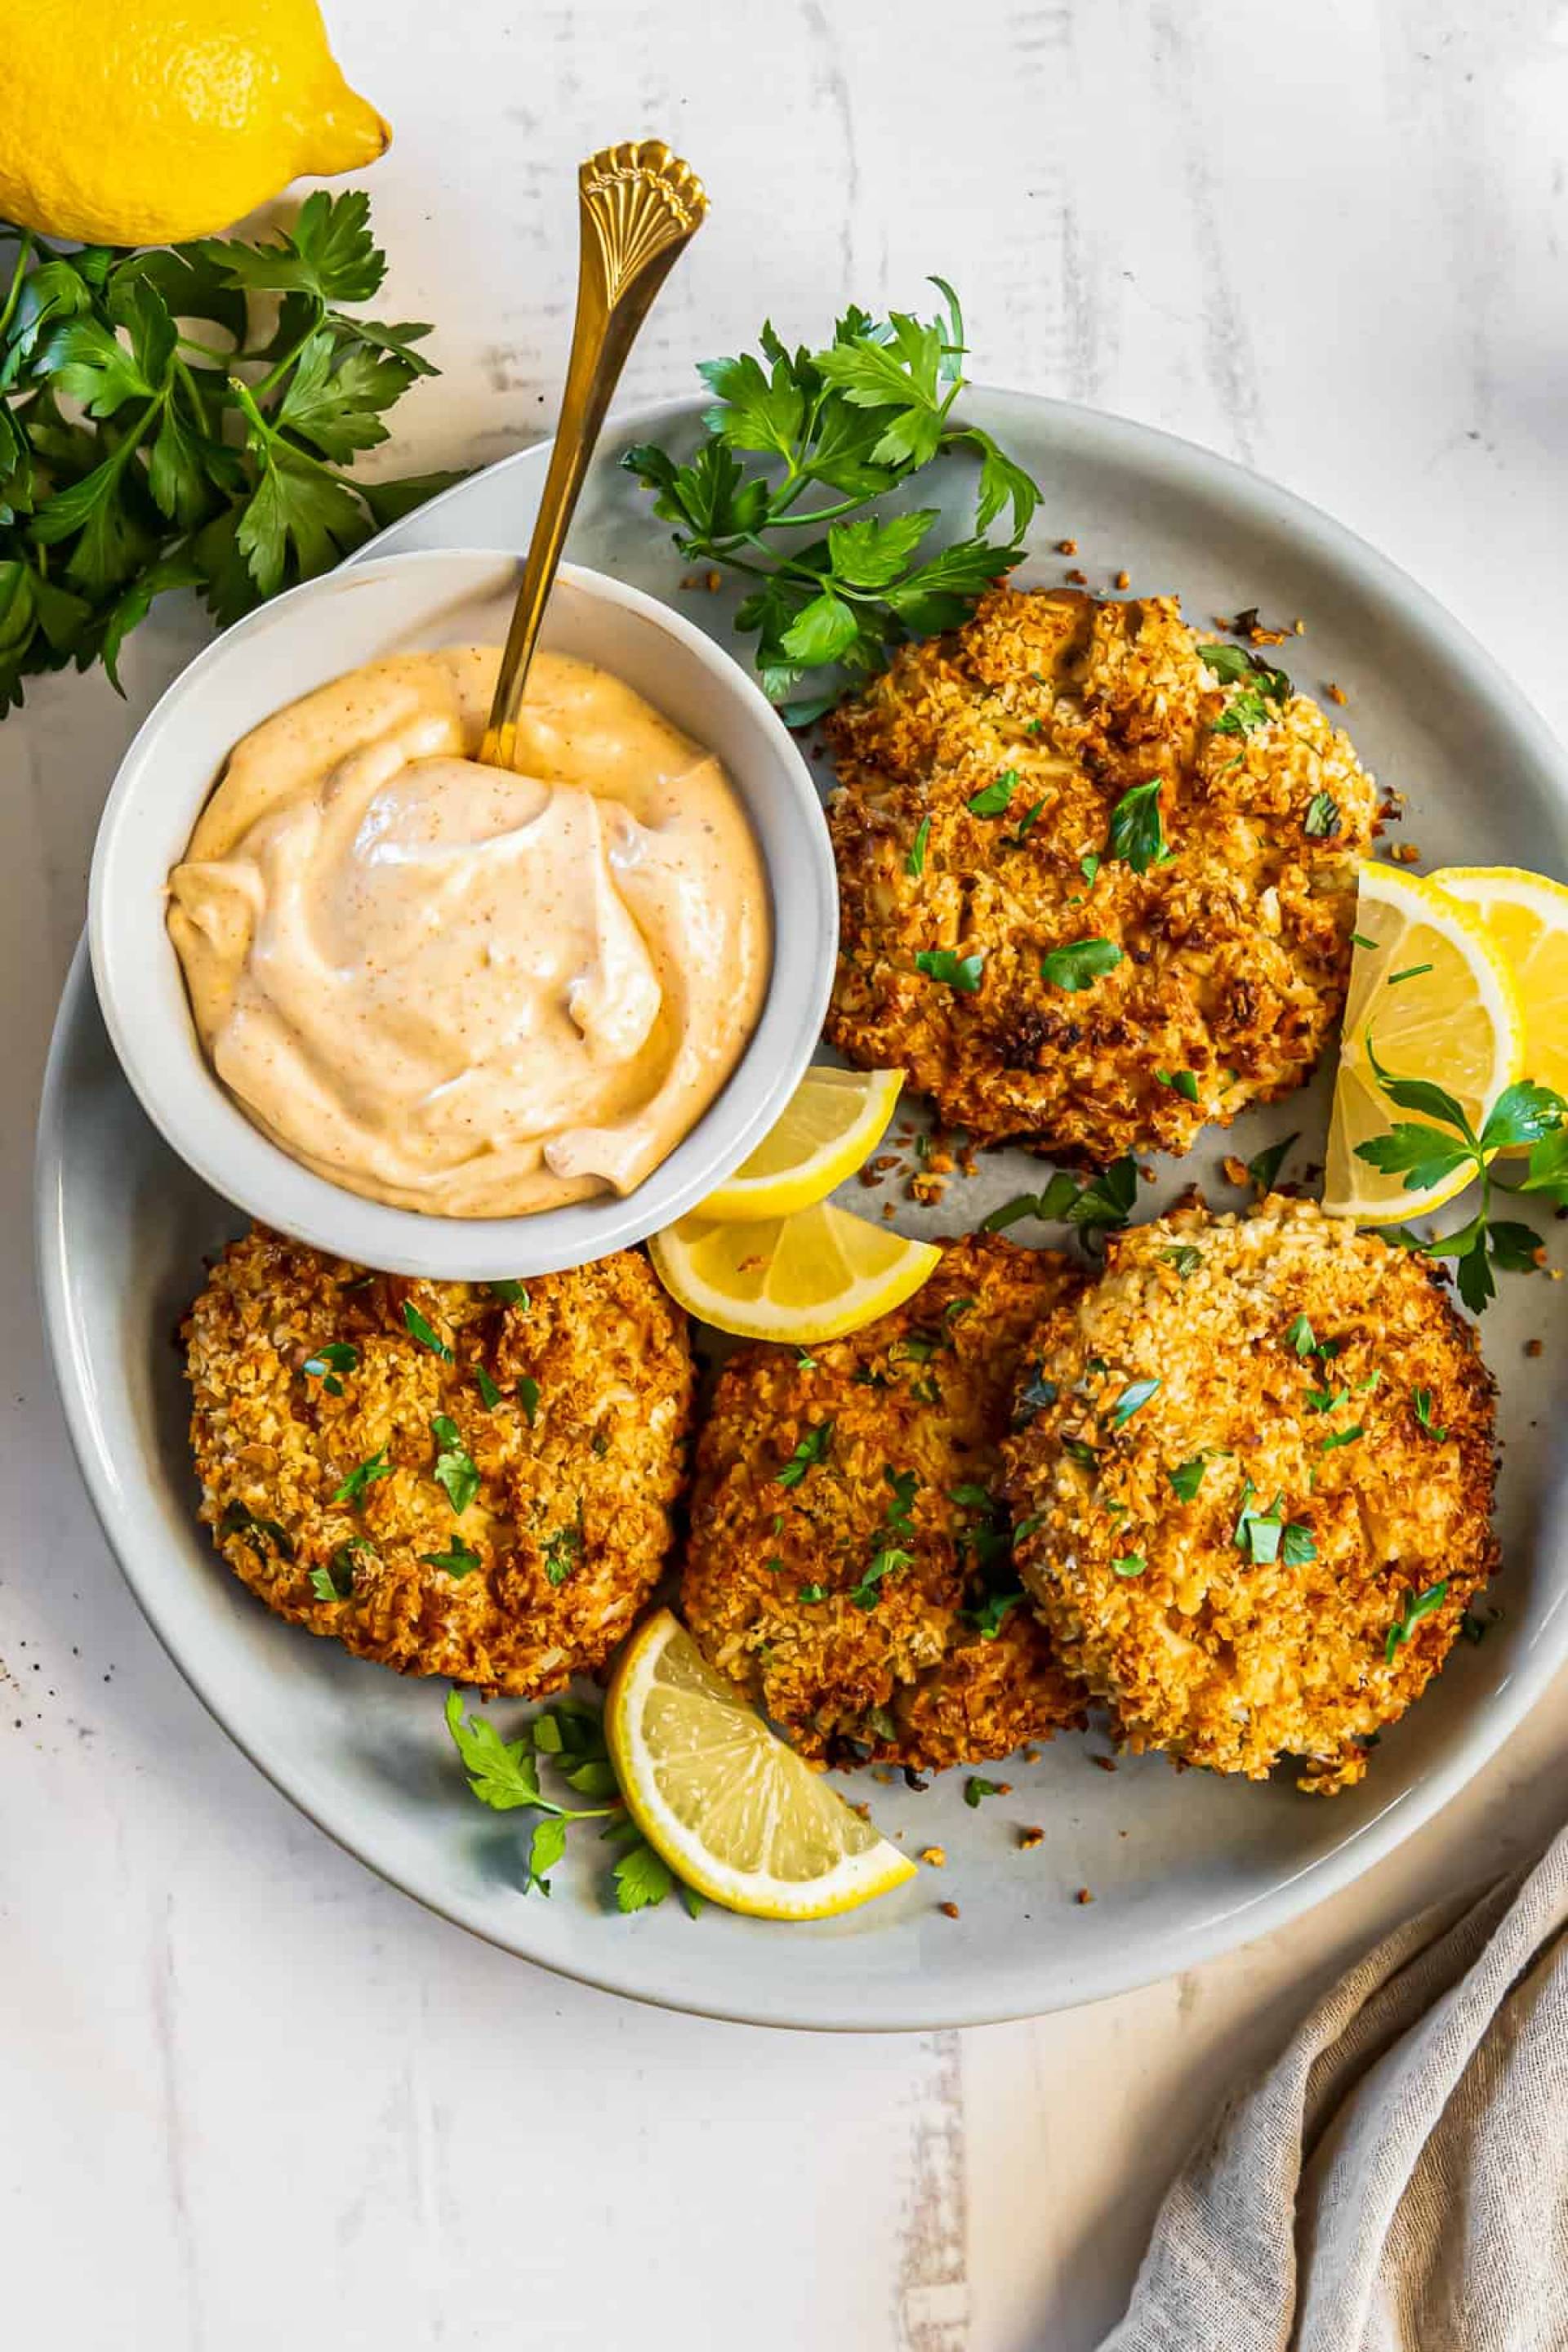 Maryland Salmon Cakes 6-Pack